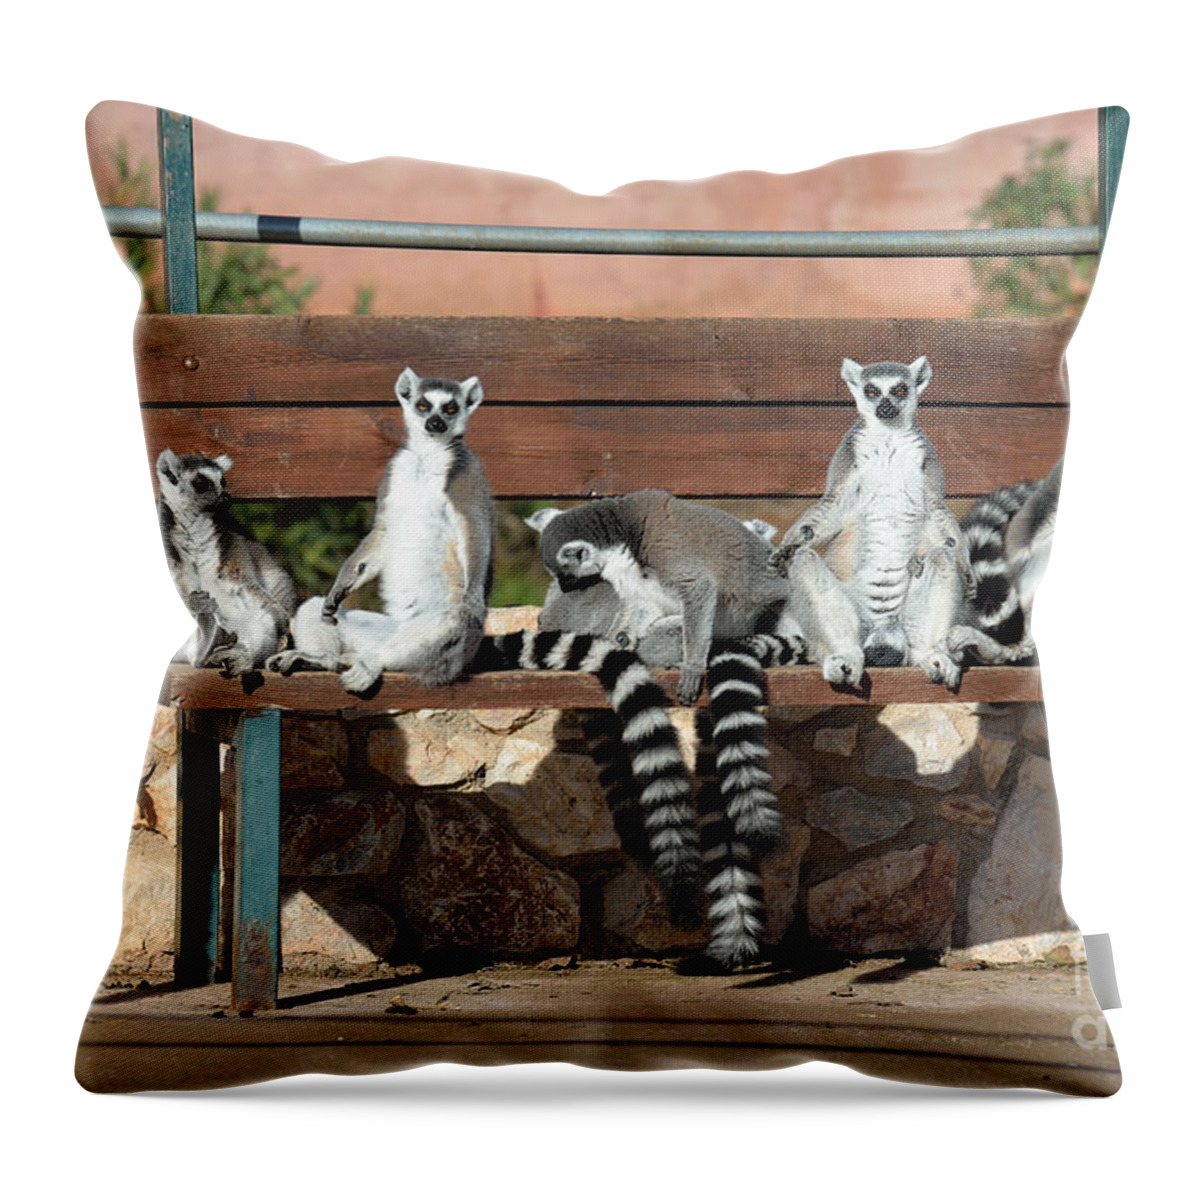 Ring Tailed Lemur Throw Pillow featuring the photograph Ring Tailed Lemurs by George Atsametakis